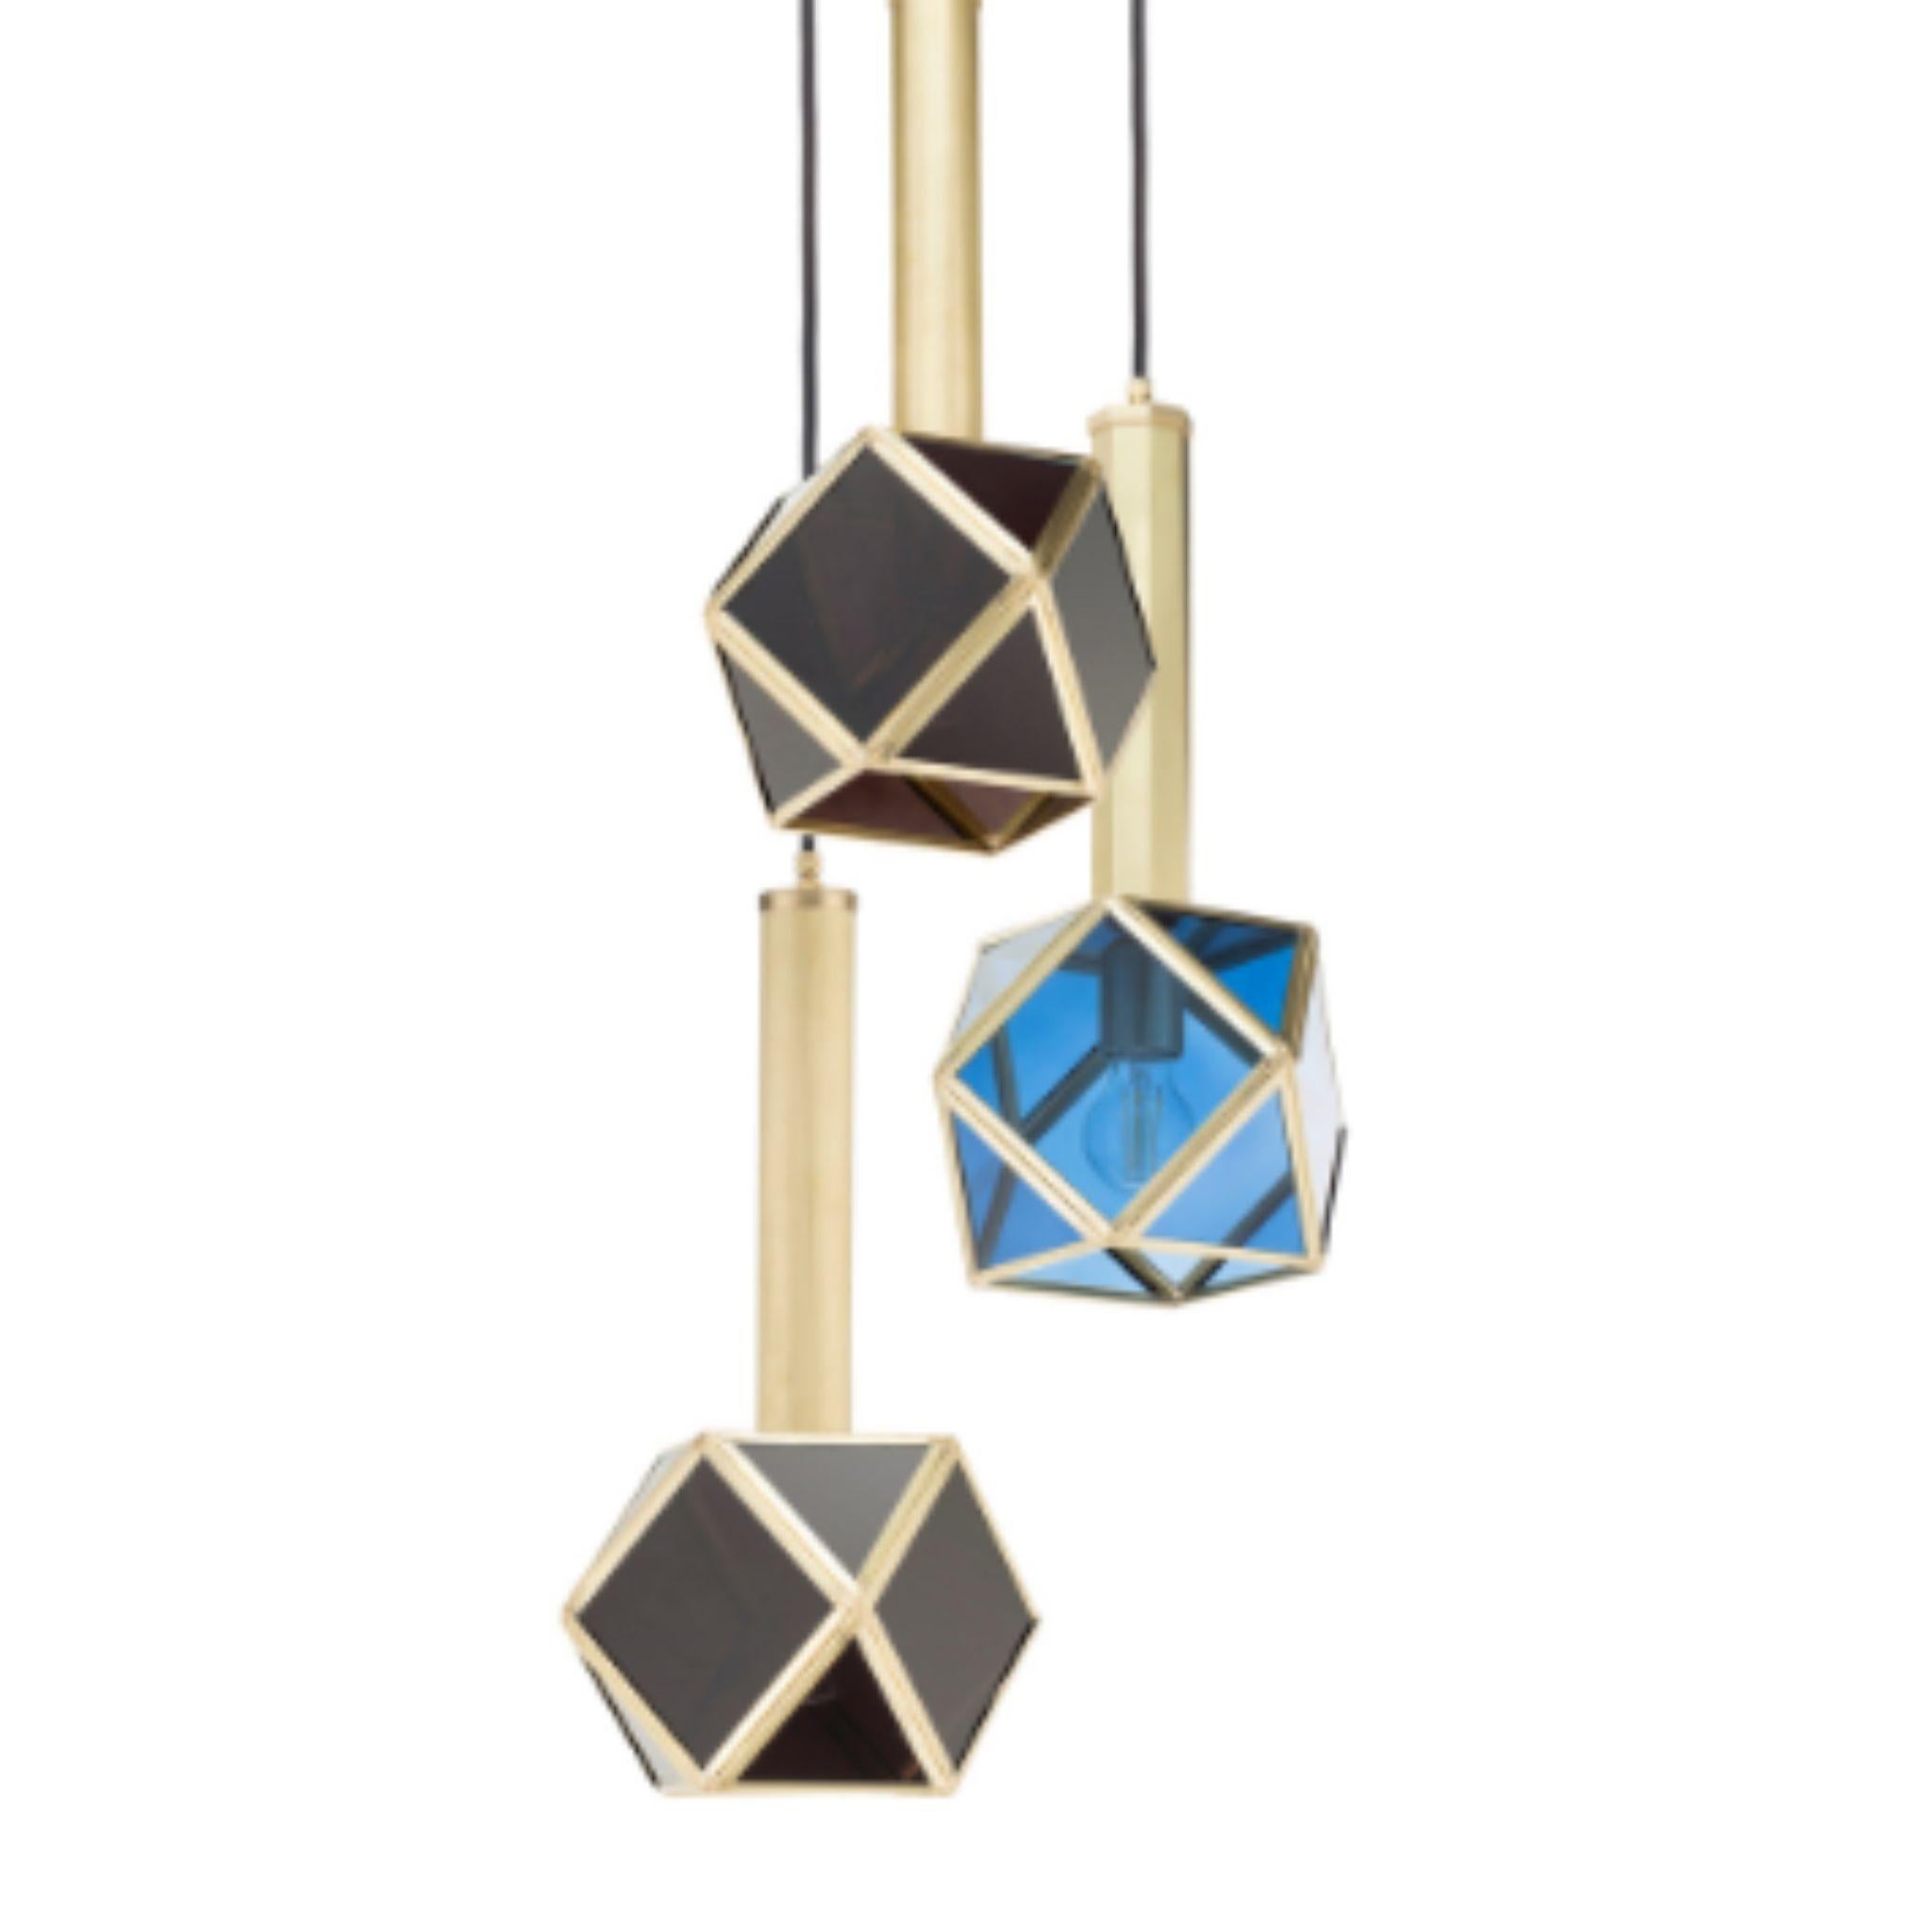 Geometrie 166 nickel brass star chandelier belongs to the Timeless collection which includes Classic and timeless lamps, the clean lines and geometries of brass and glass of this chandelier expand in height from small to large Size. Modernity